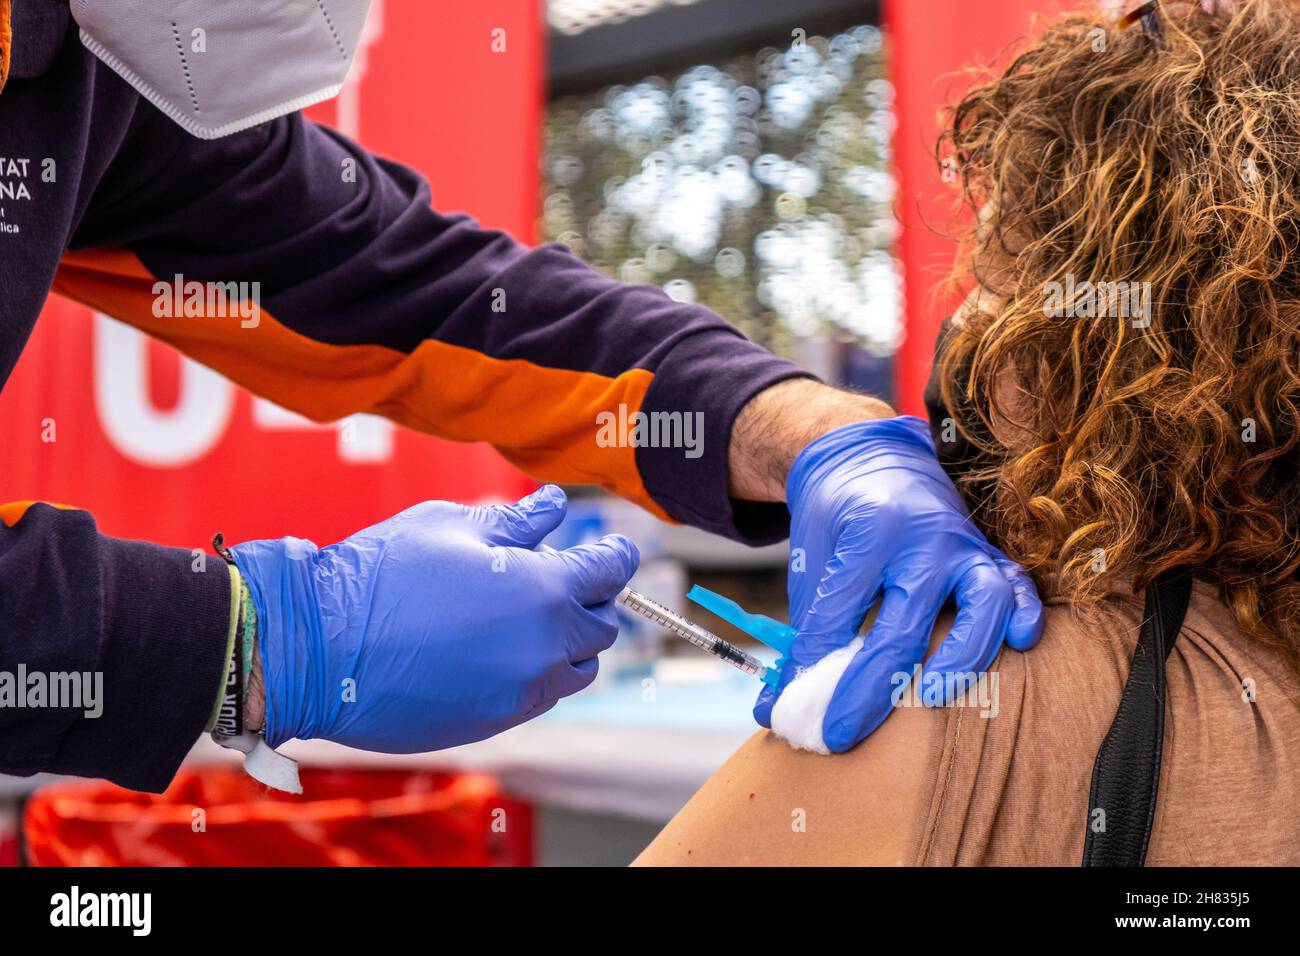 Valencia, Spain; 6th april 2021: Healthcare professional injects the anticovid vaccine to a patient at a Vaccination Center. Anti-covid vaccination ca Stock Photo